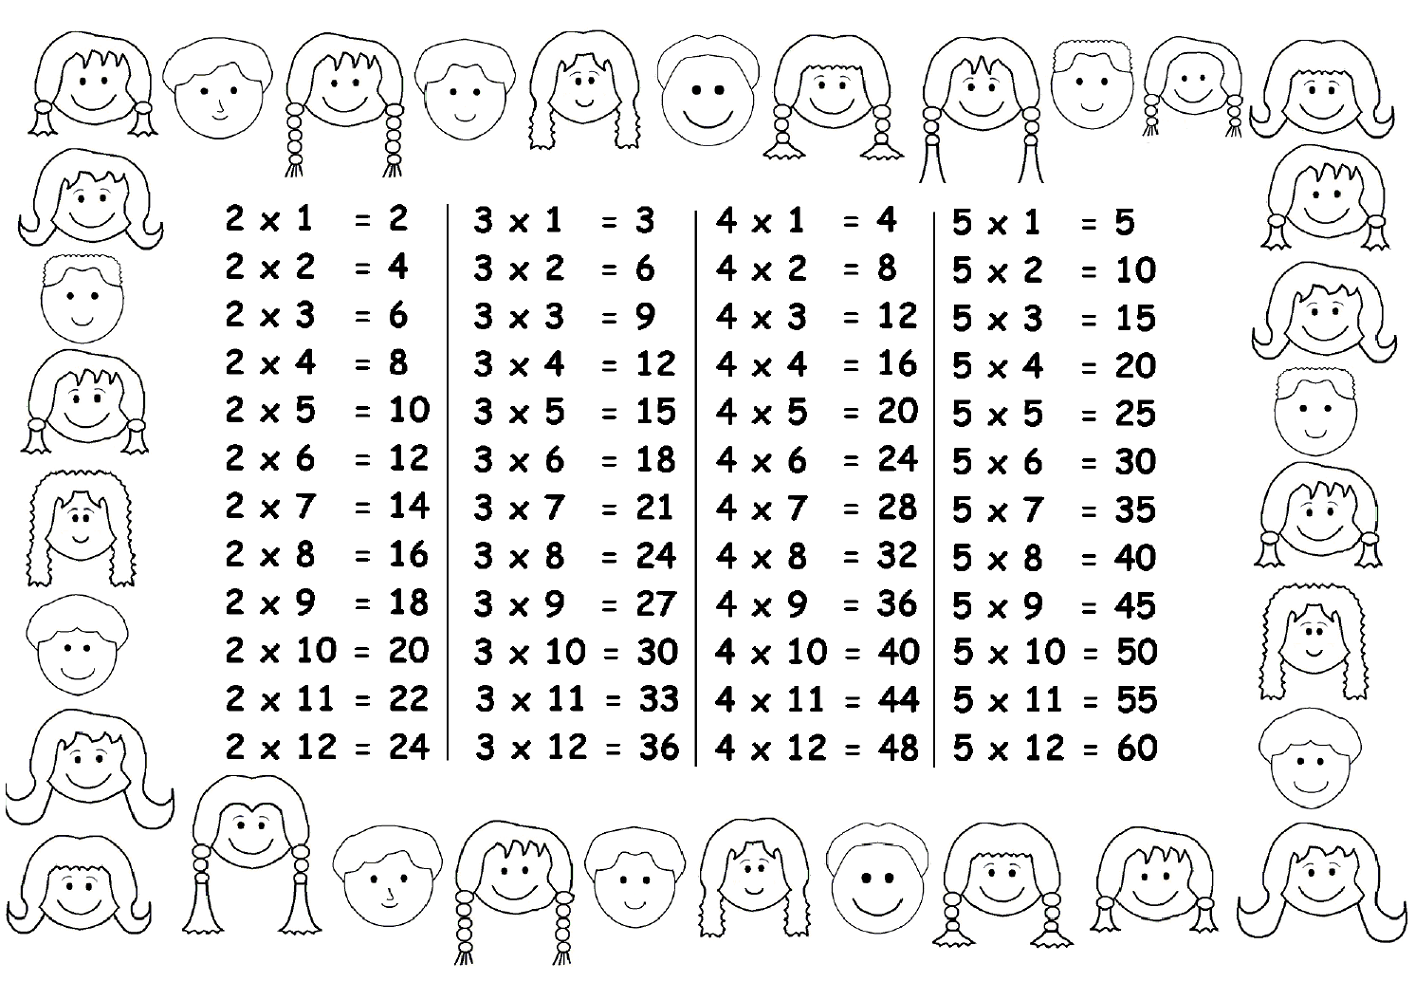 3 times table chart for kids